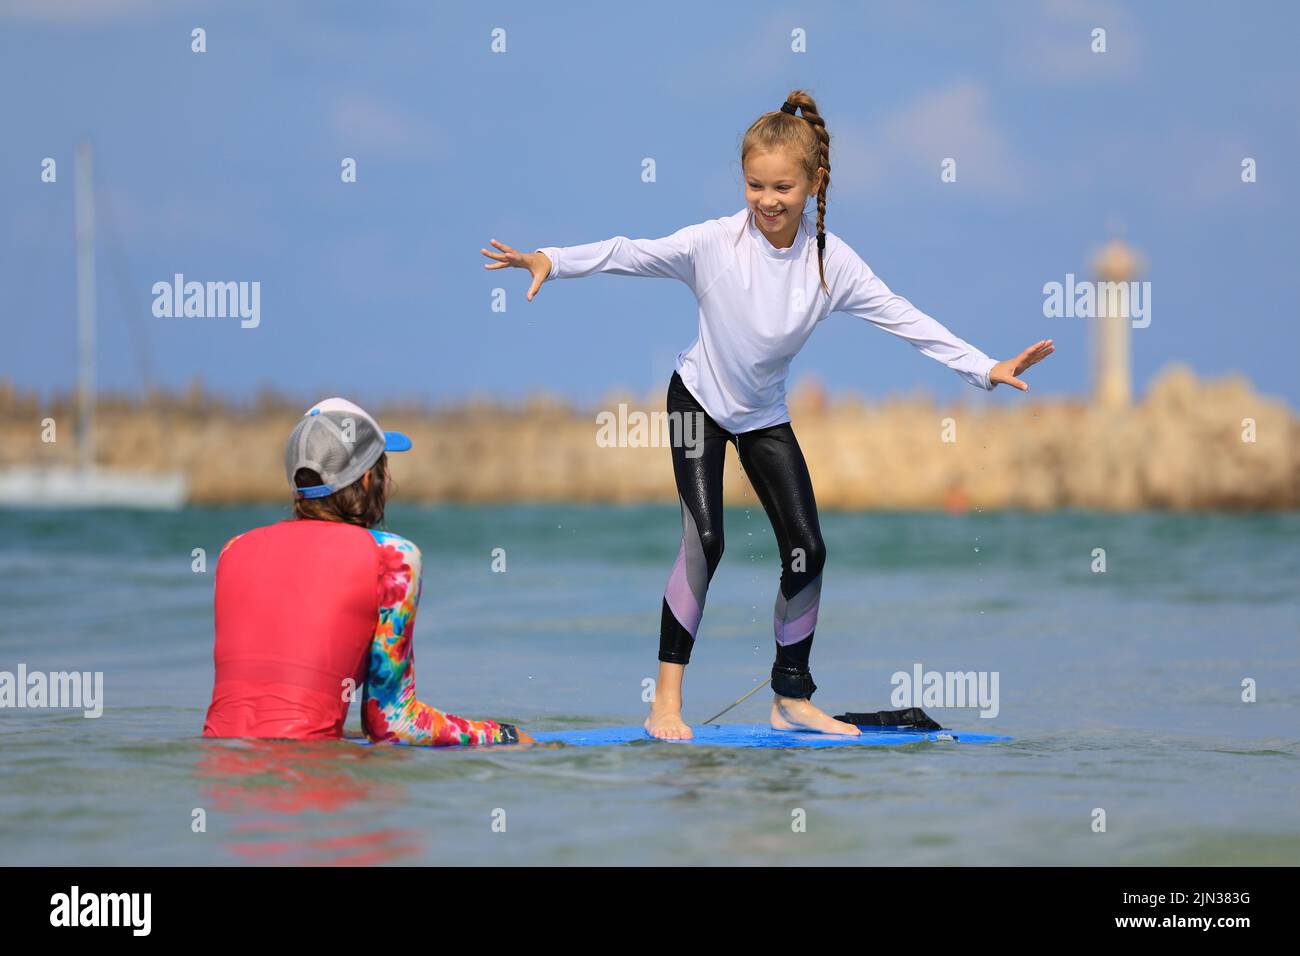 young surfer learn to ride on surfboard with instructor at surfing school. Active family lifestyle, kids water sport lessons Stock Photo